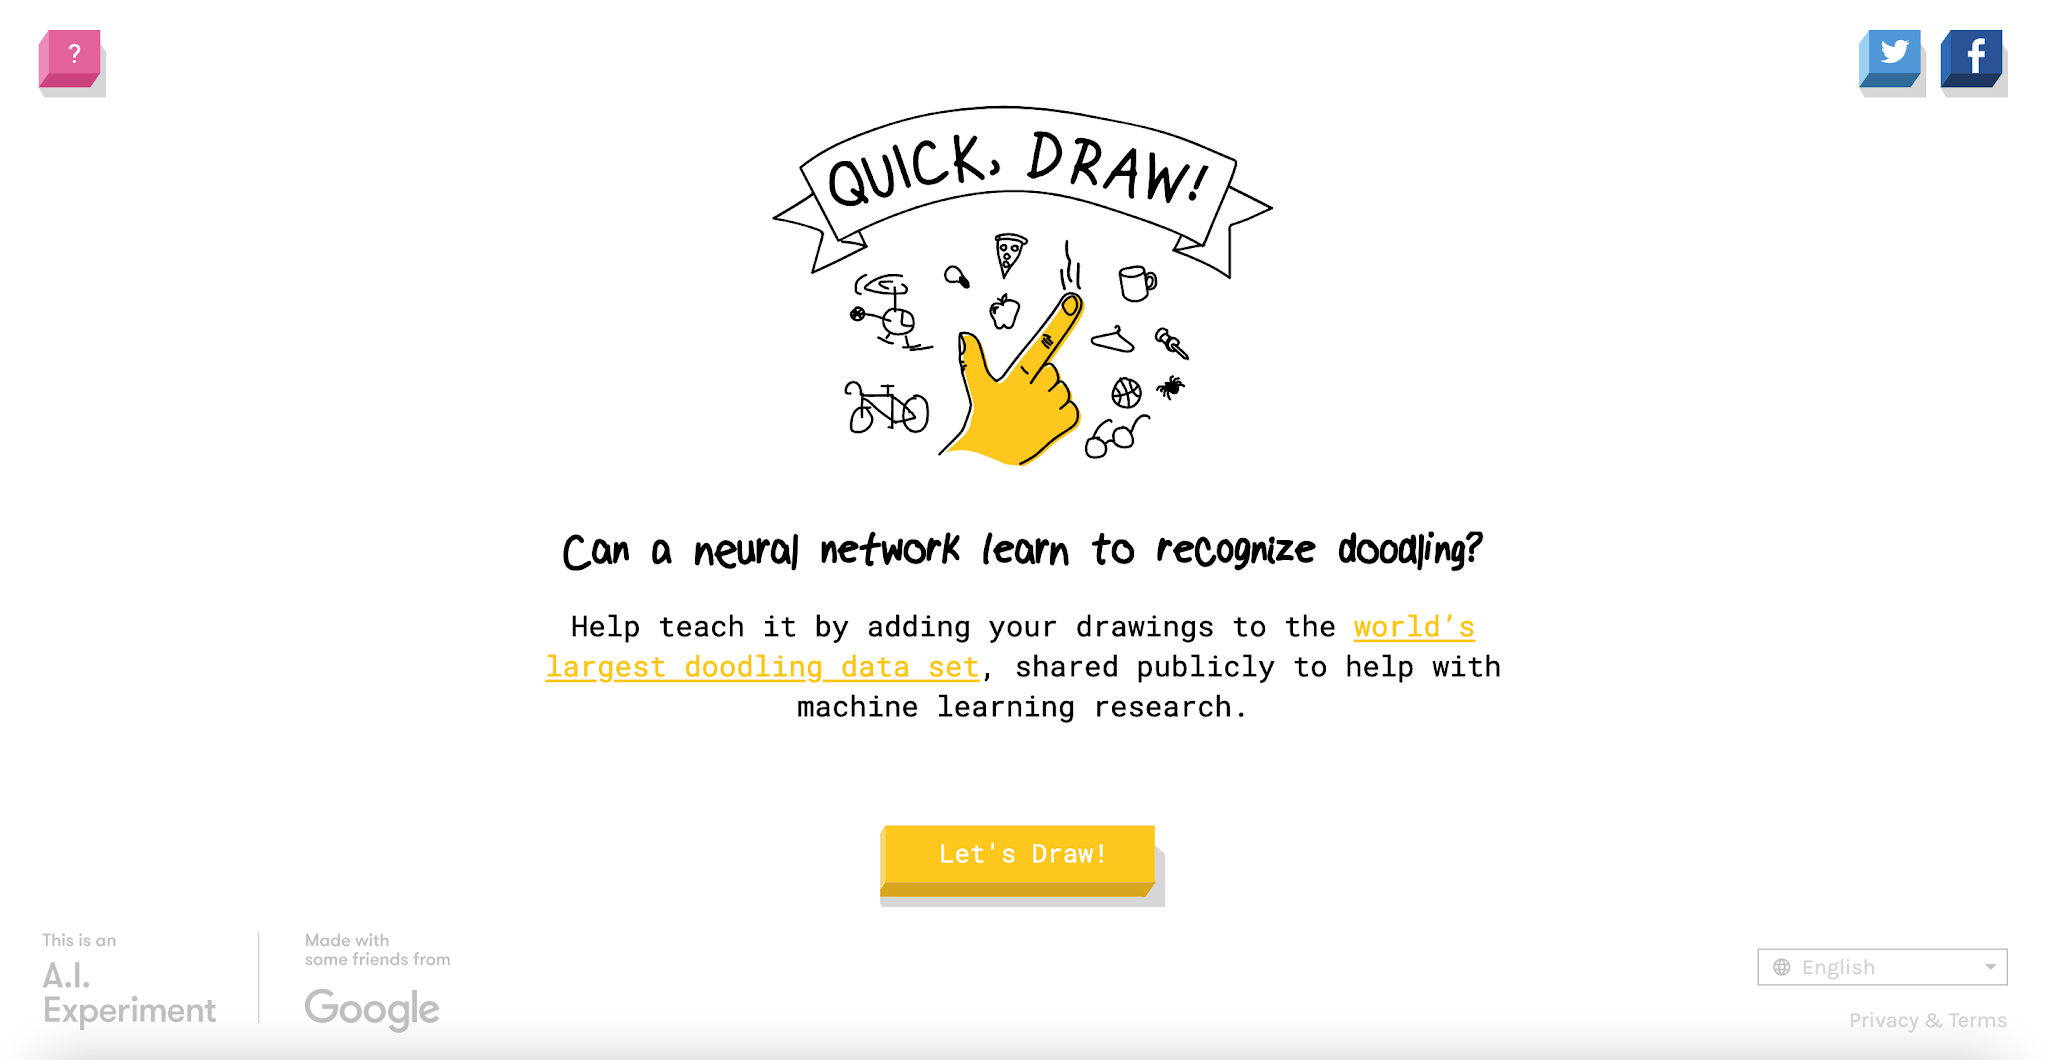 Quick Draw by Google is an AI powered web based doodle game